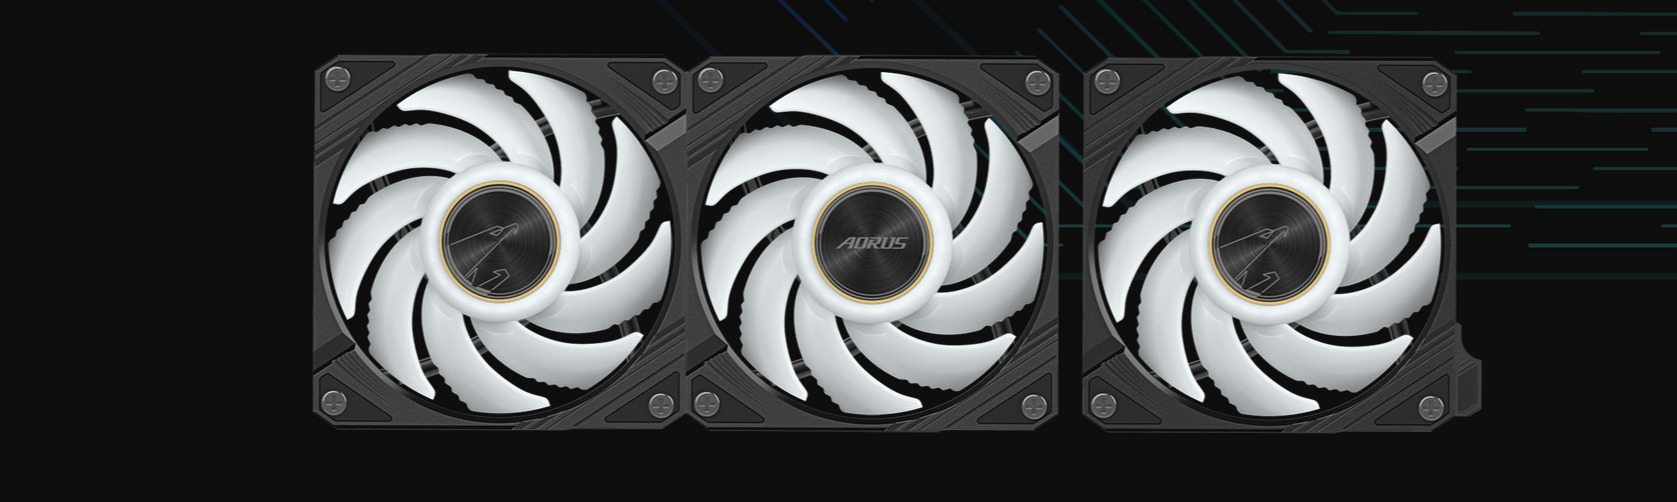 A large marketing image providing additional information about the product Gigabyte AORUS WATERFORCE X II 360 360mm AIO Liquid Cooler - Additional alt info not provided